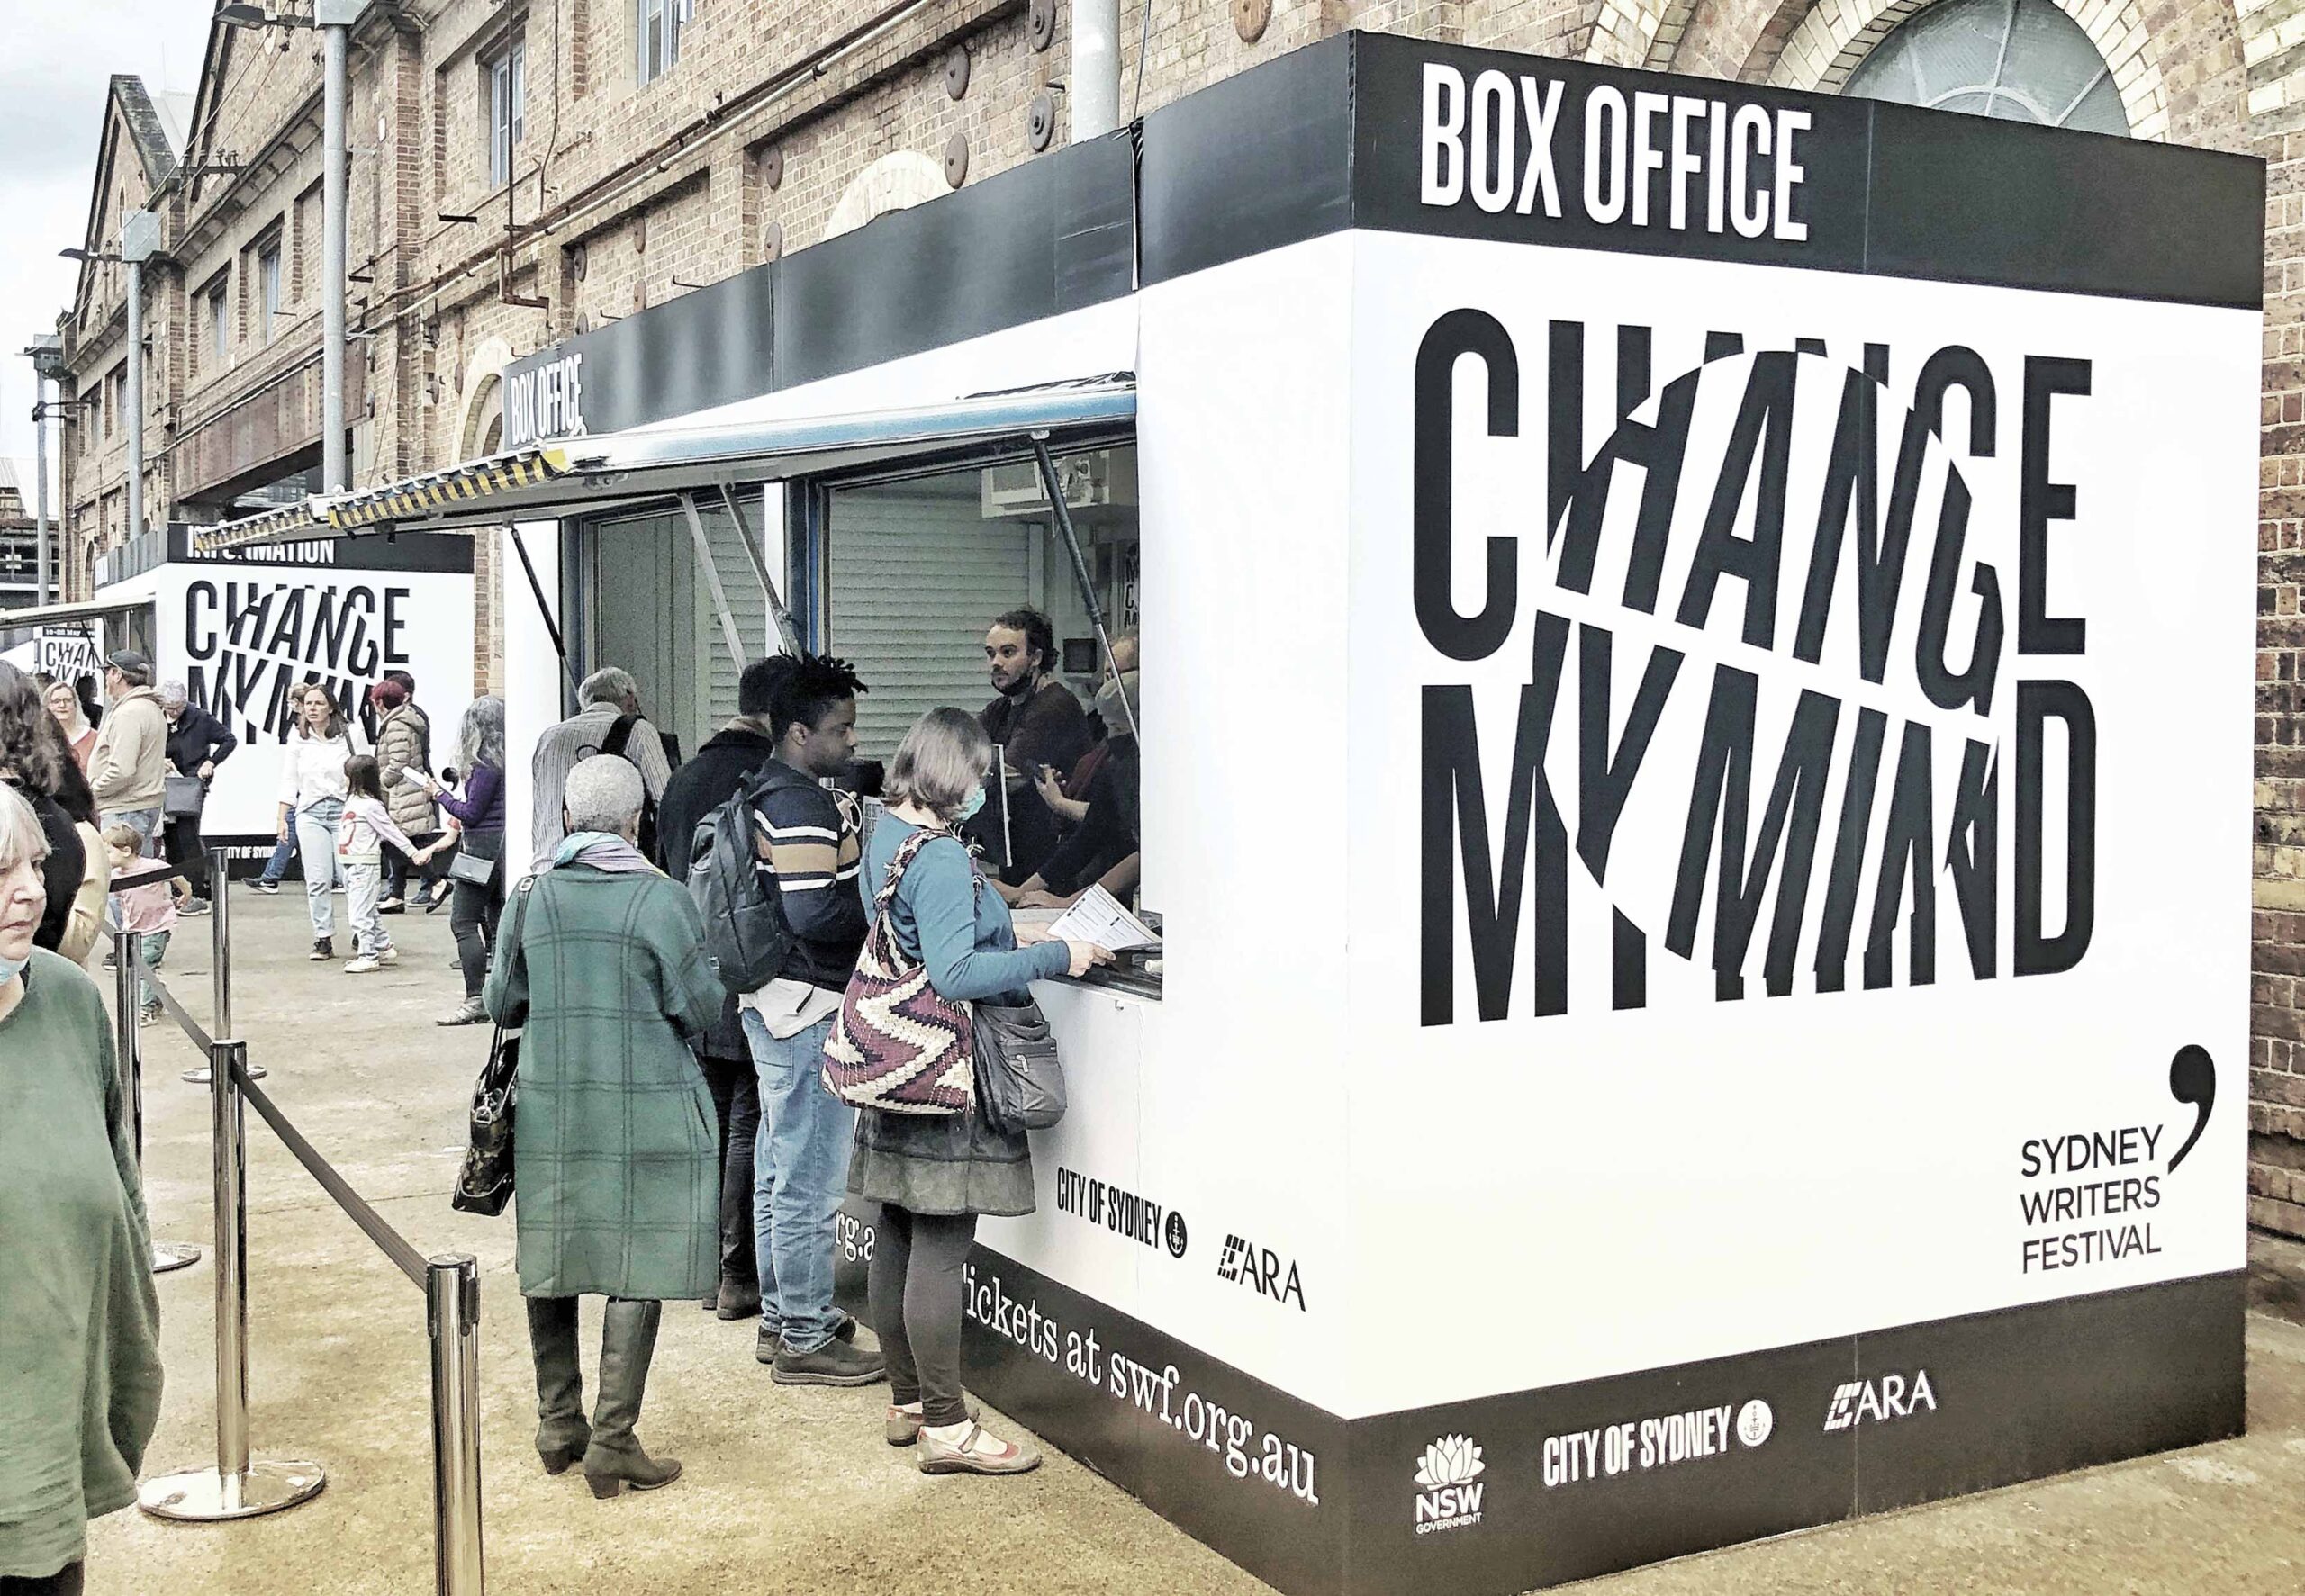 Pic of Sydney Writers Festival 2022 Box Office